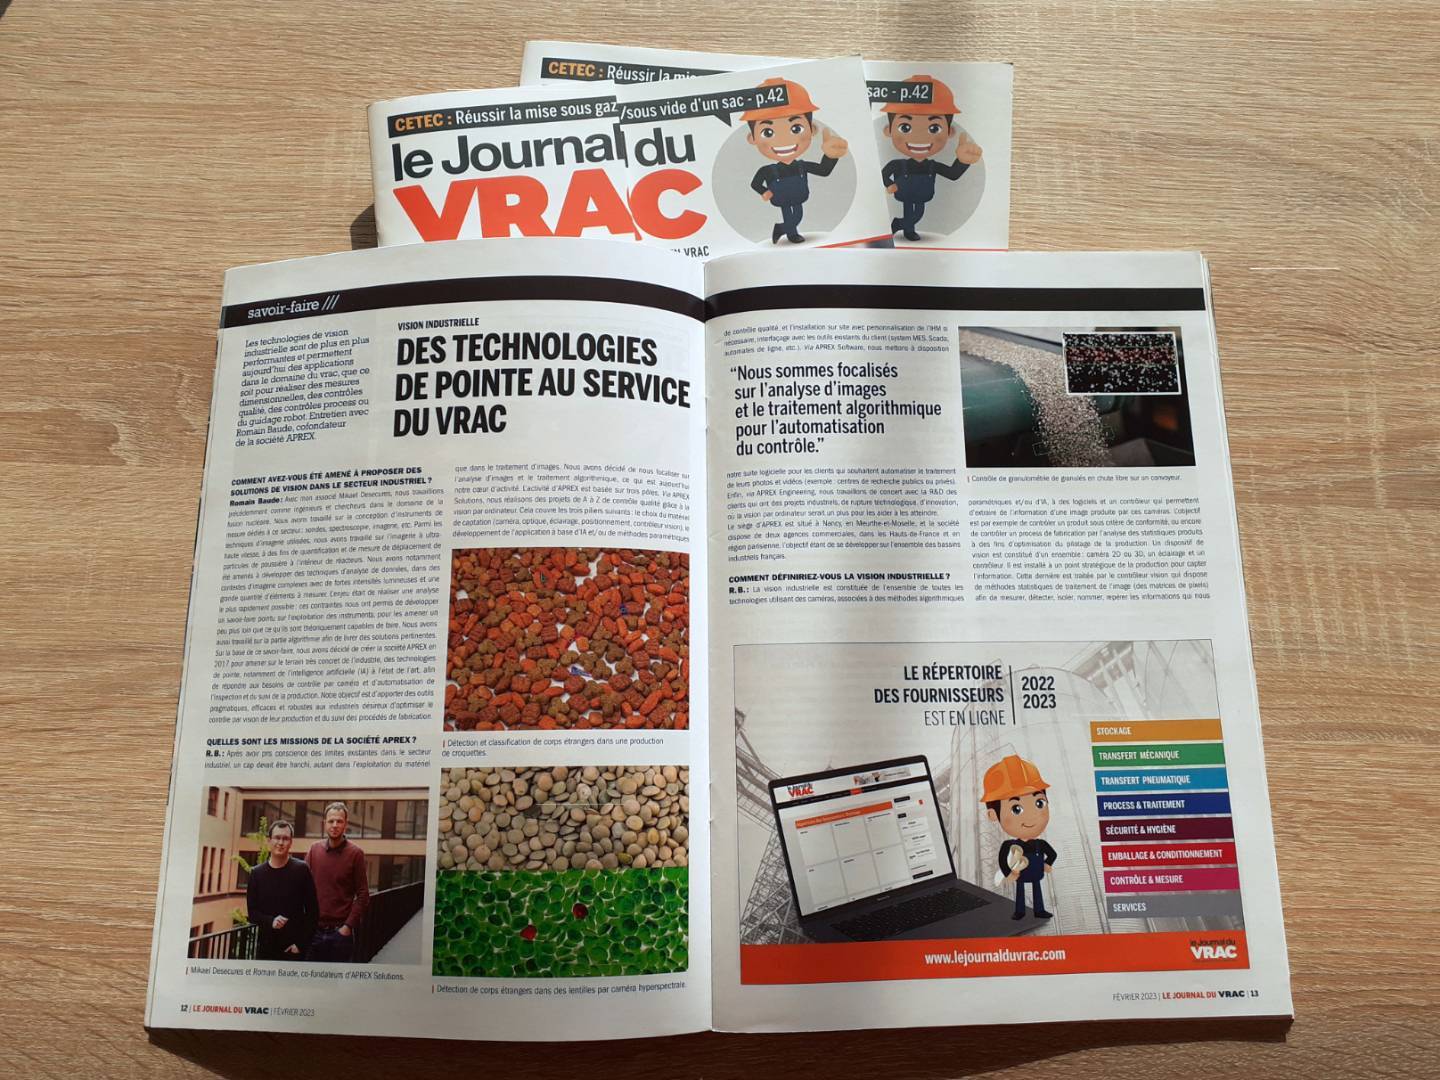 photo from the trade magazine Le Journal du Vrac opened on the APREX Solution article.